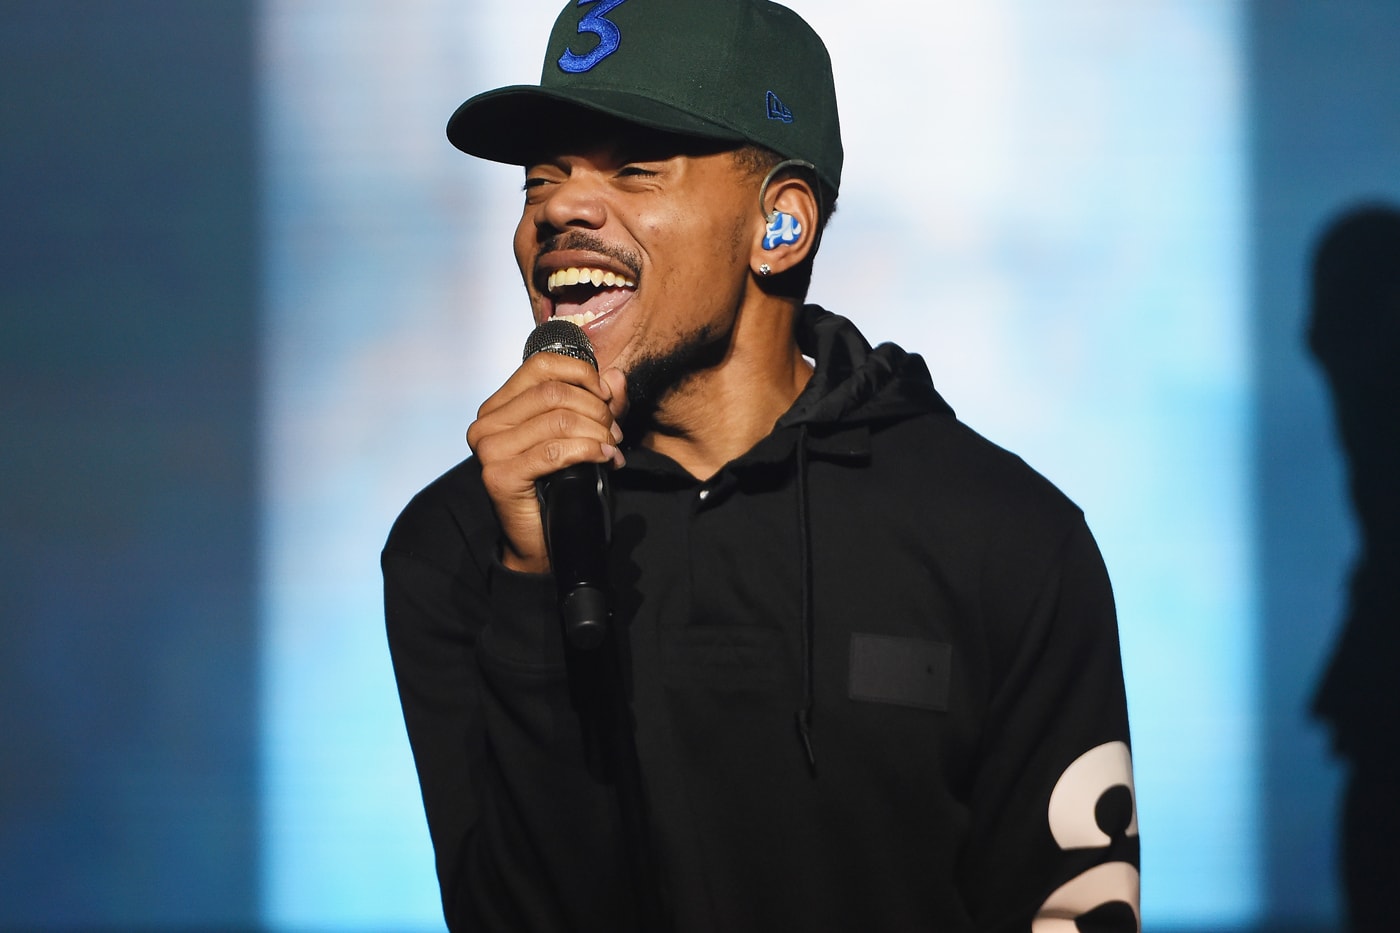 Watch Chance The Rapper Tinashe Perform All My Friends on Jimmy Kimmel